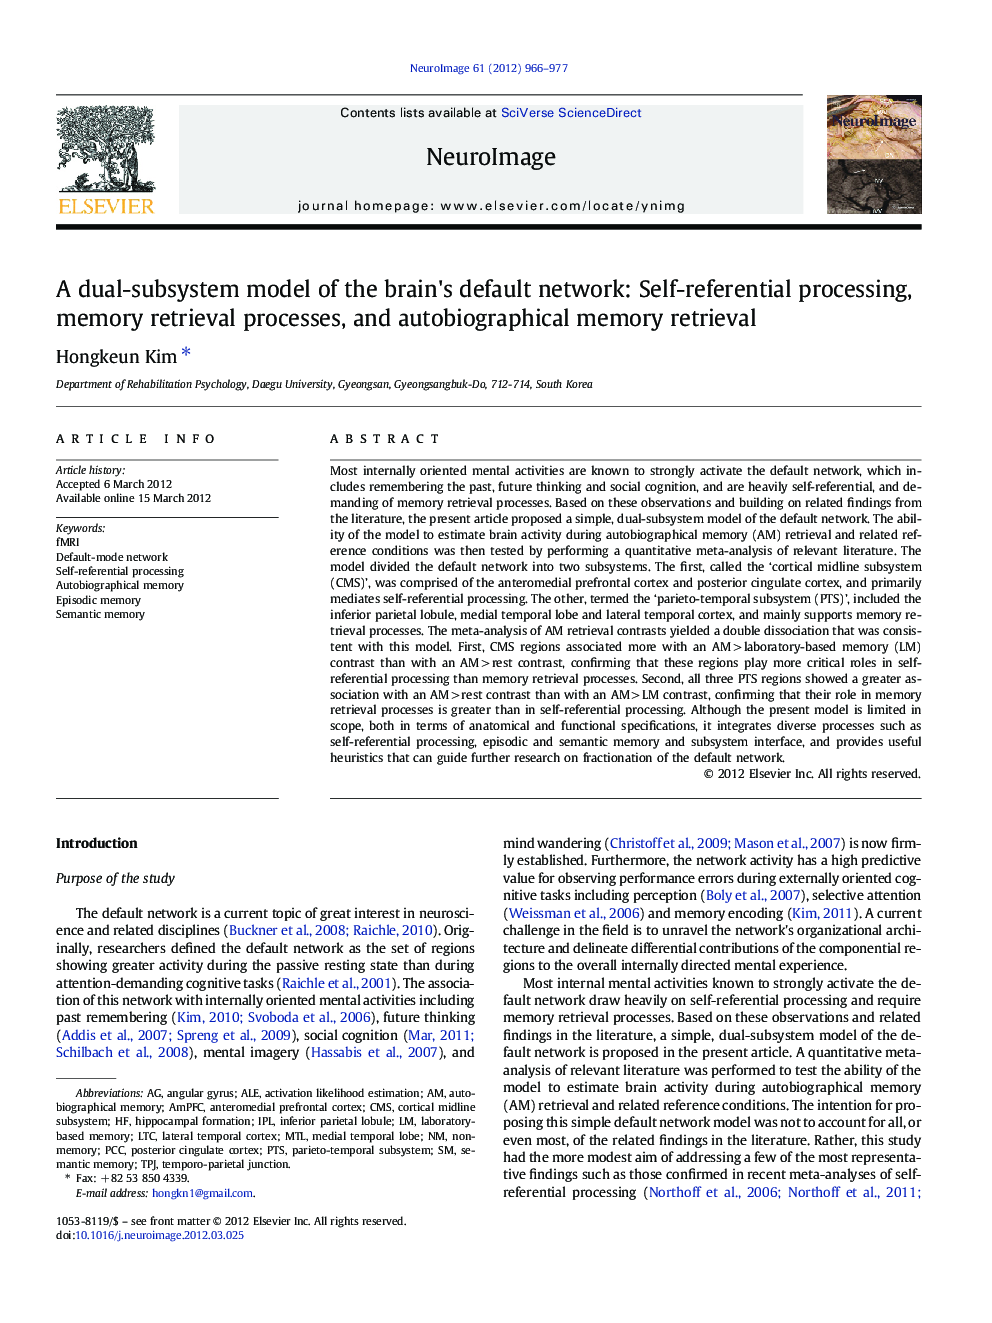 A dual-subsystem model of the brain's default network: Self-referential processing, memory retrieval processes, and autobiographical memory retrieval